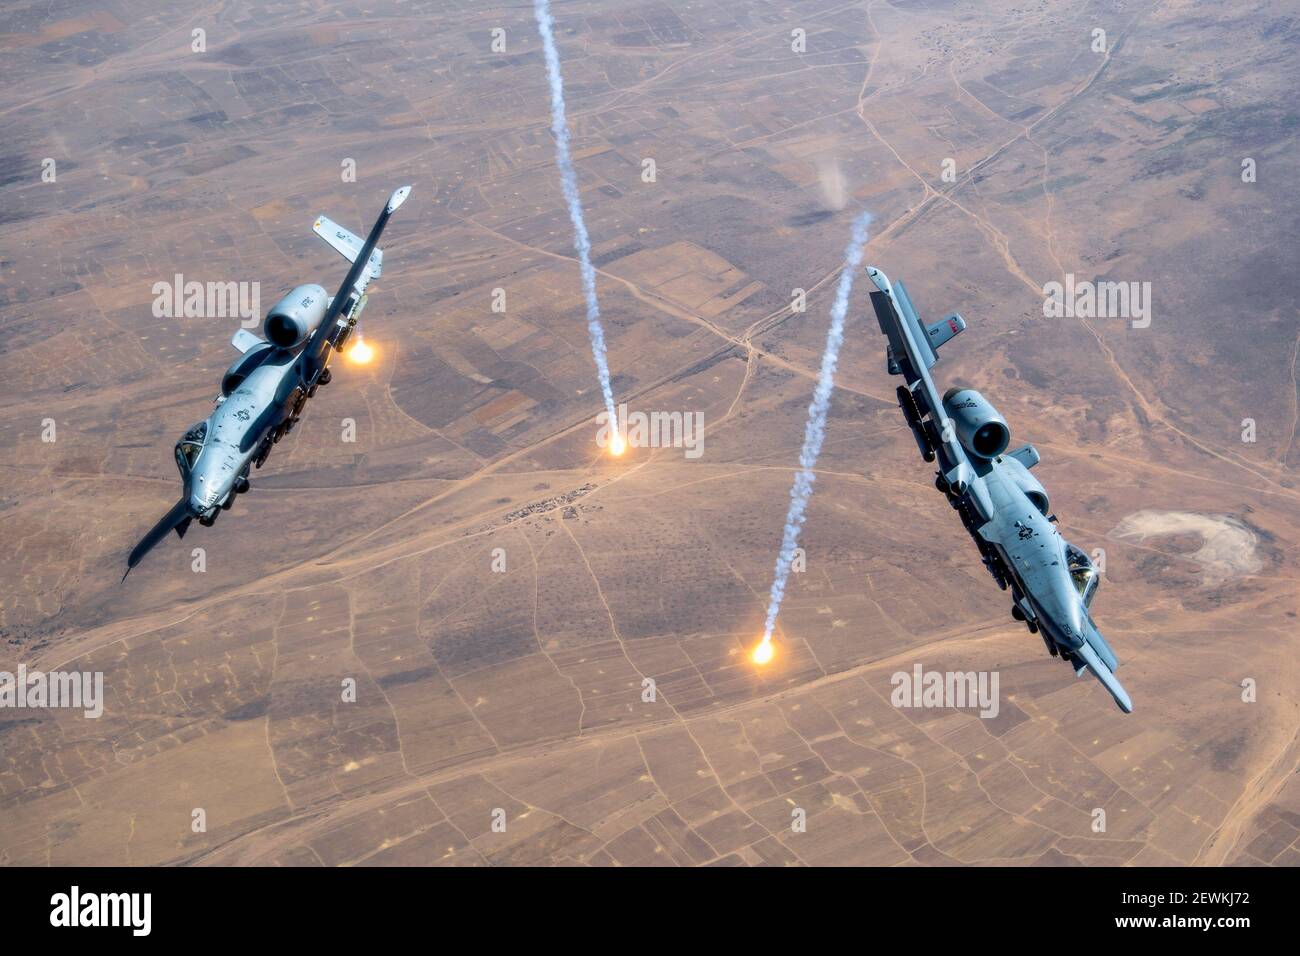 Two A-10 Thunderbolt IIs release countermeasure flares over the U. S. Central Command area of responsibility, July 23, 2020. The A-10 is a highly Stock Photo